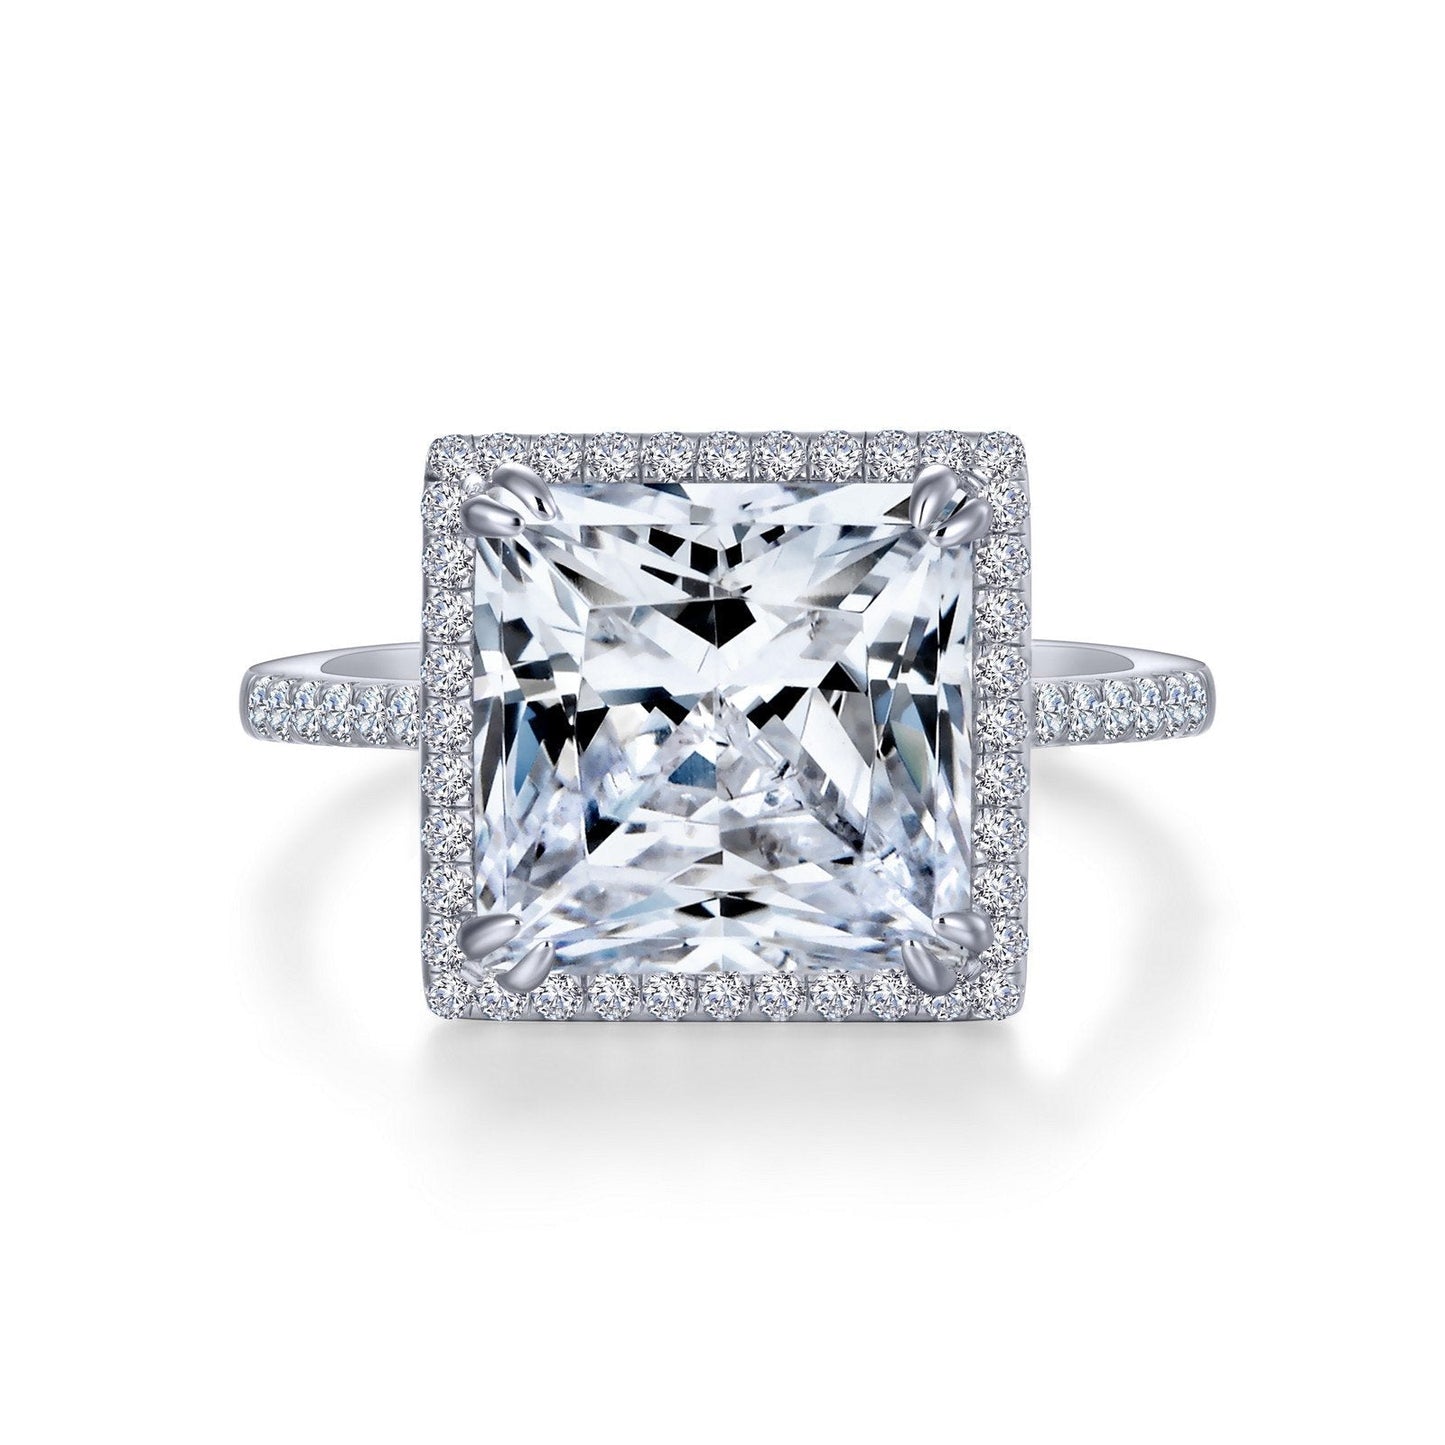 Lafonn Stunning Engagement Ring Simulated Diamond RINGS Size 8 Platinum 6.15 CTS Approx. 12mm (W)